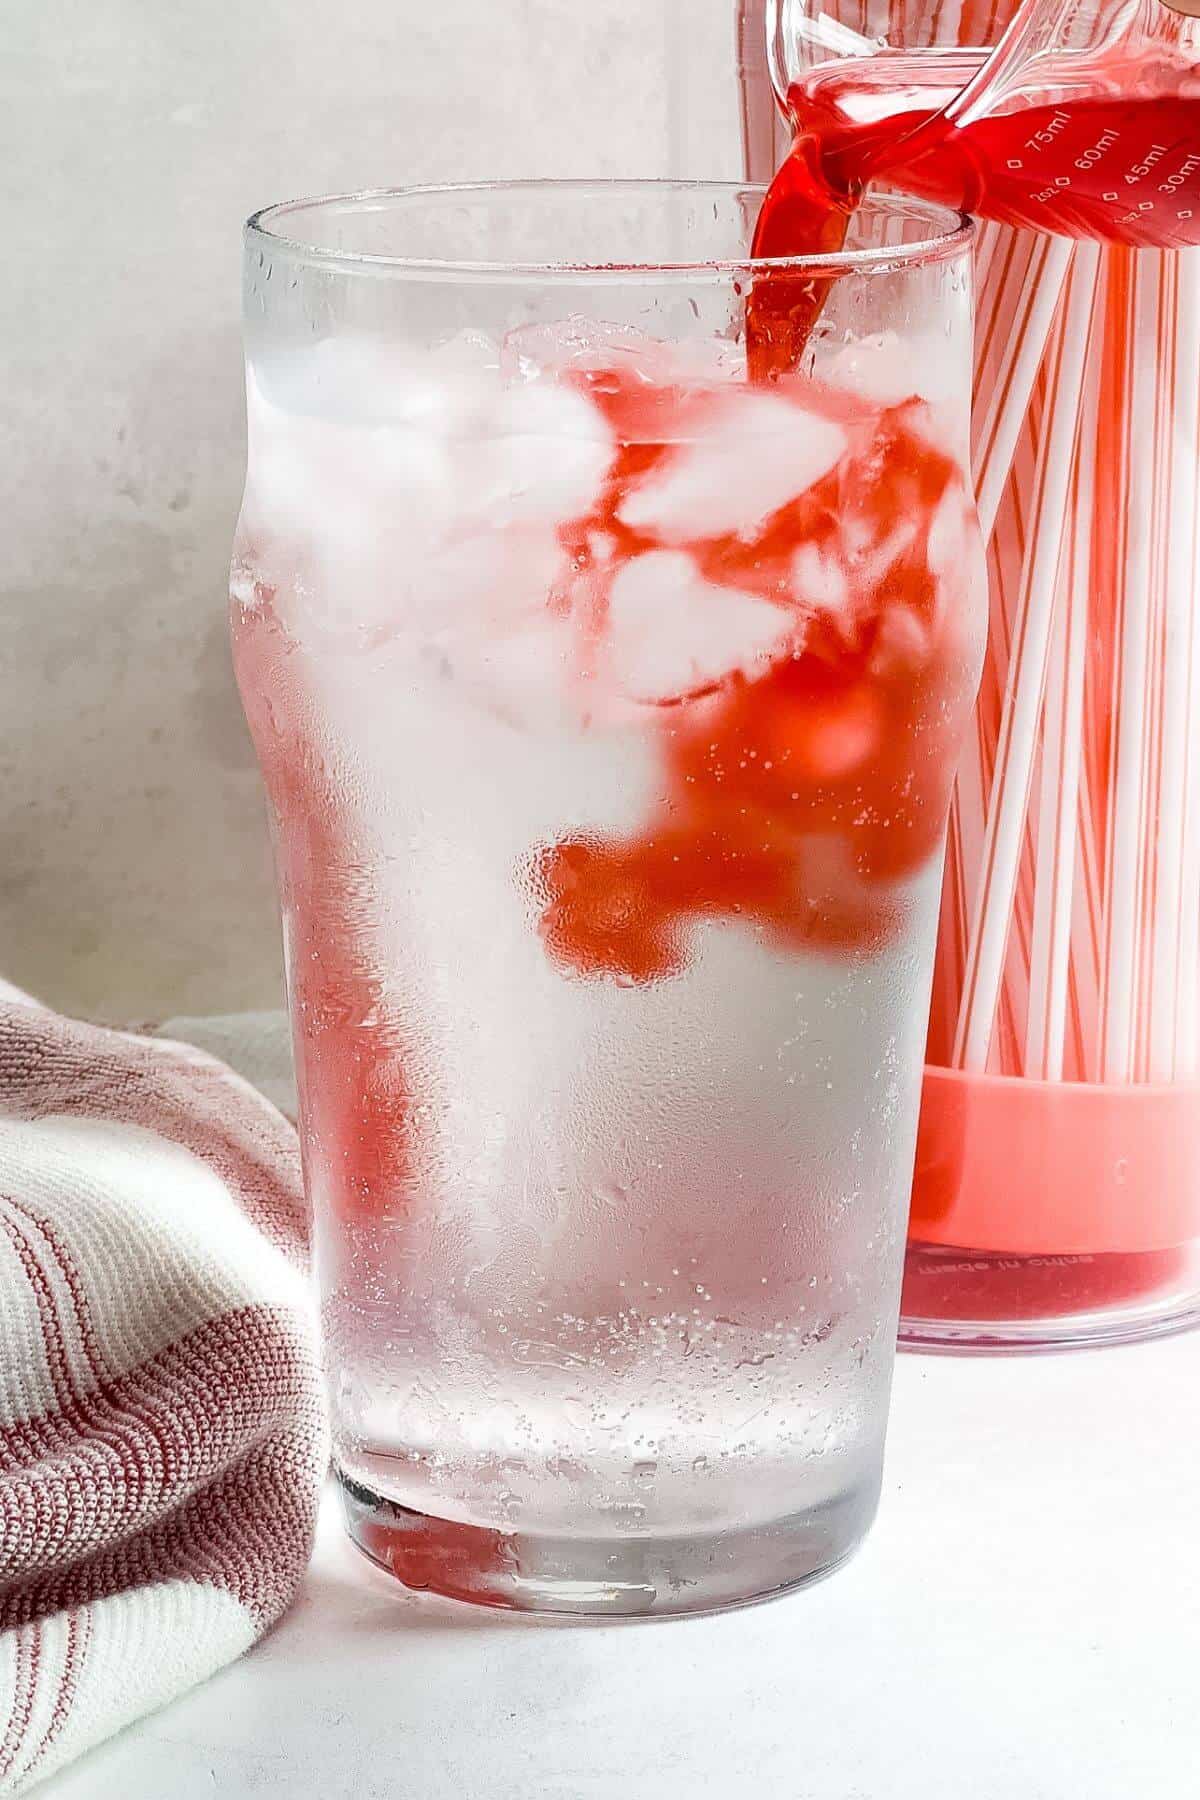 Adding cherry juice to glass of sprite and ice.